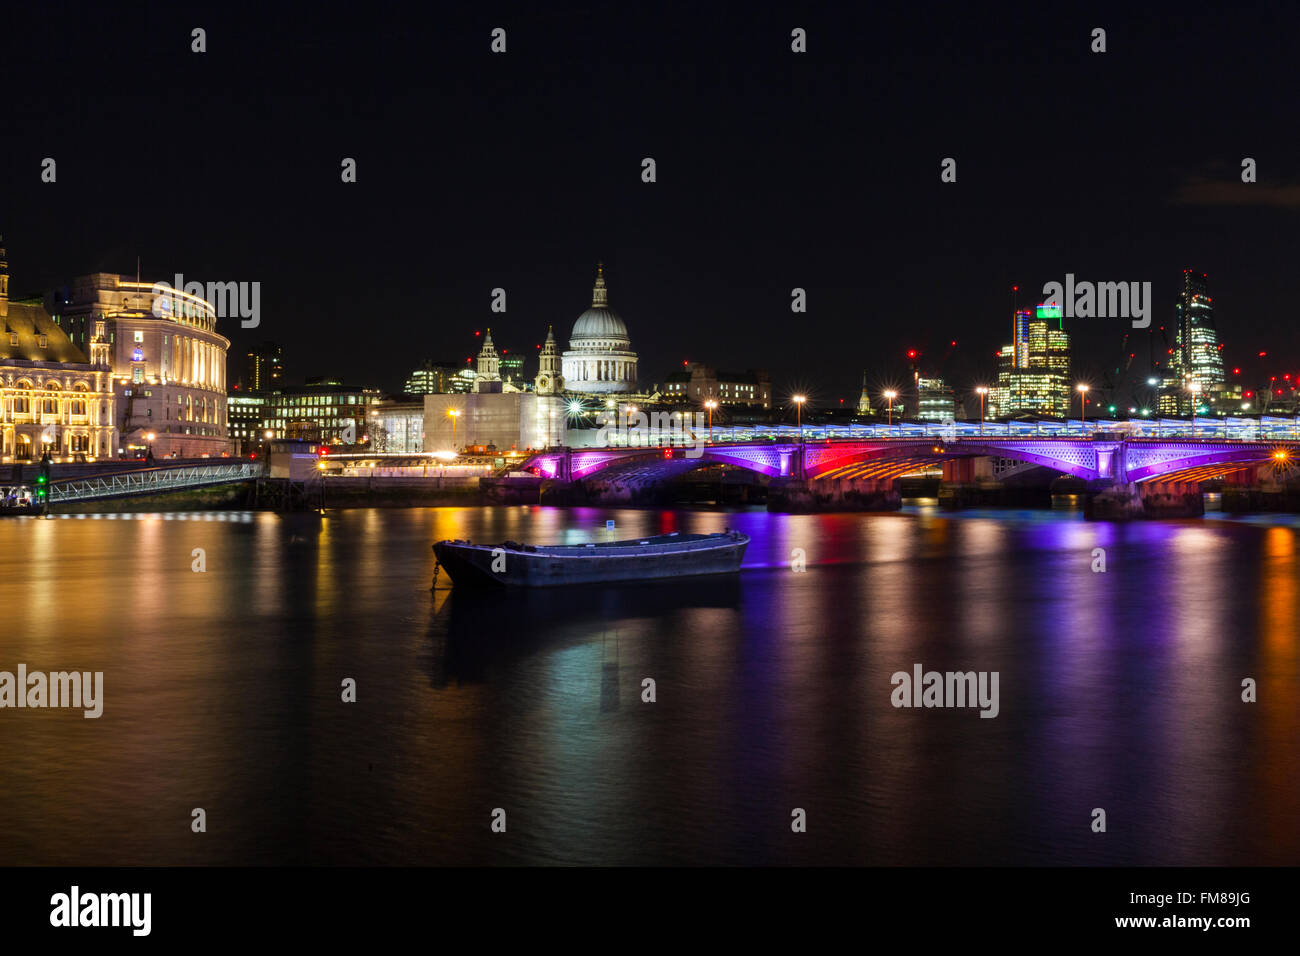 London at night - Blackfriars Bridge and the River Thames, illuminated St Paul's Cathedral in the background Stock Photo